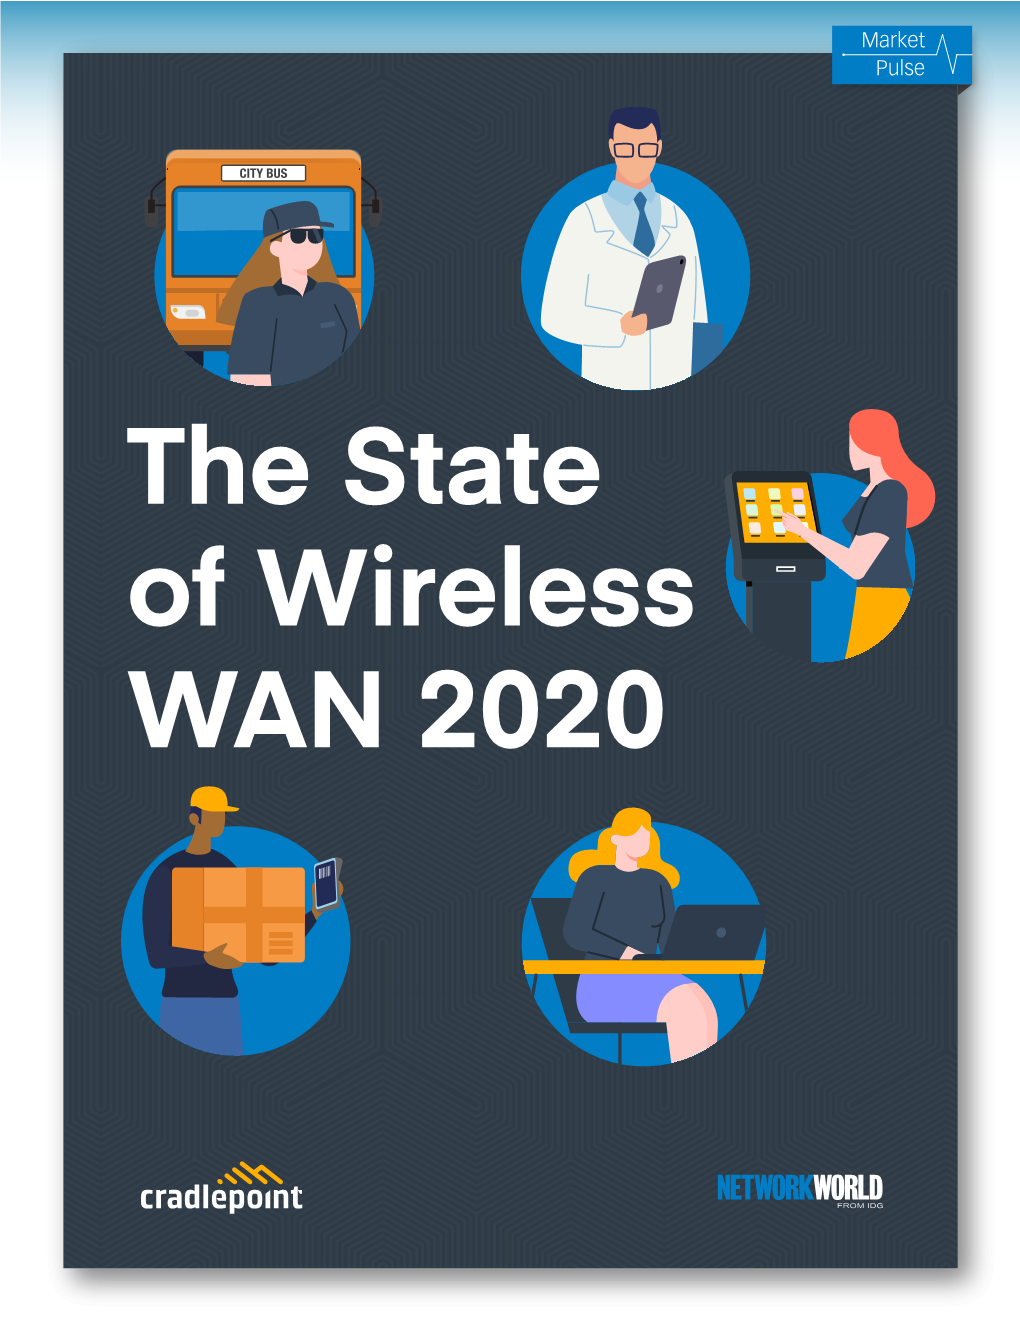 The State of Wireless WAN 2020 Market Pulse